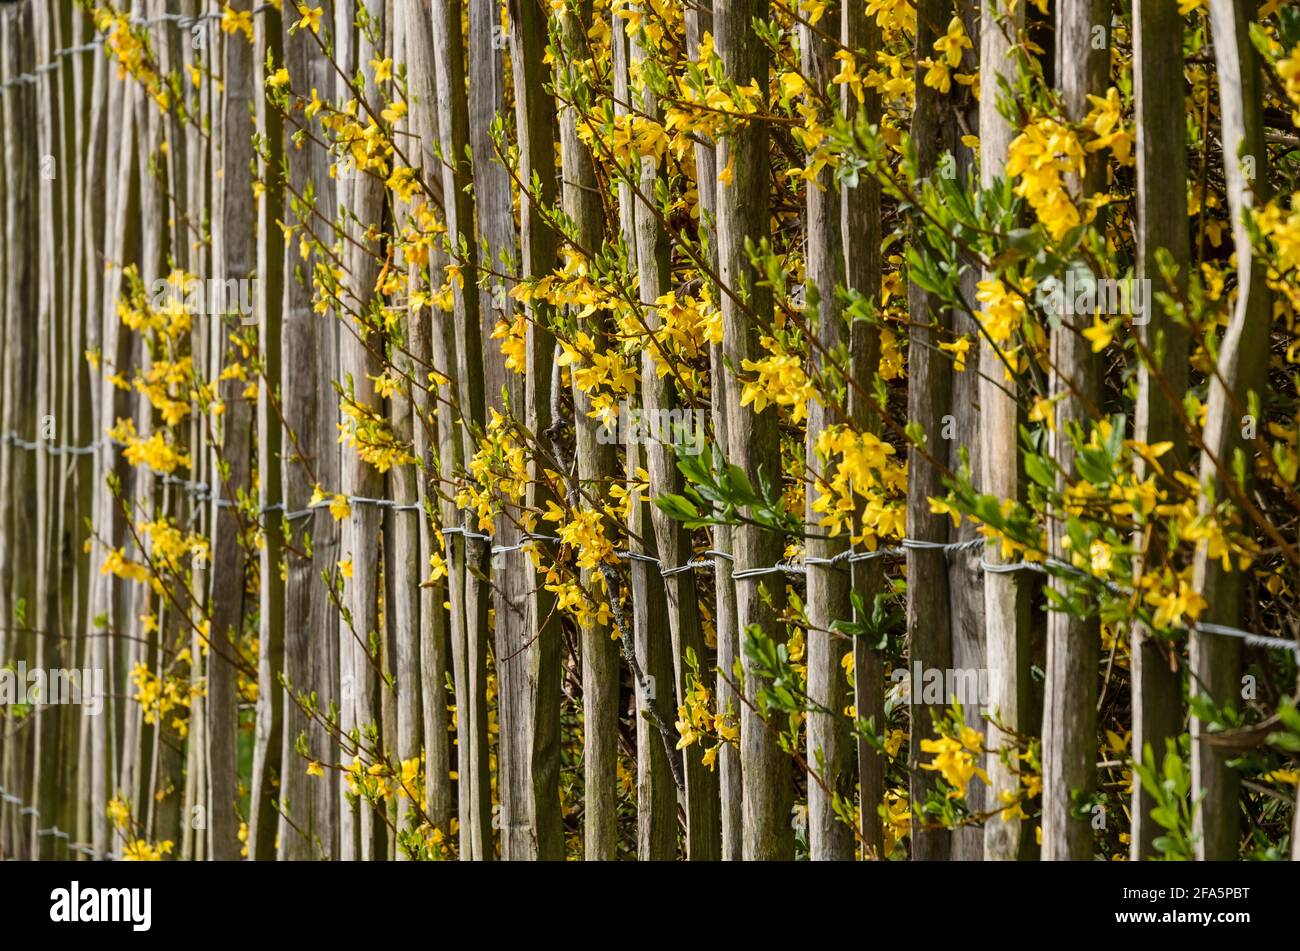 Wooden fence made of thin poles with metal wires around a garden with yellow Forsythia intermedia, or border forsythia in bloom during spring Stock Photo